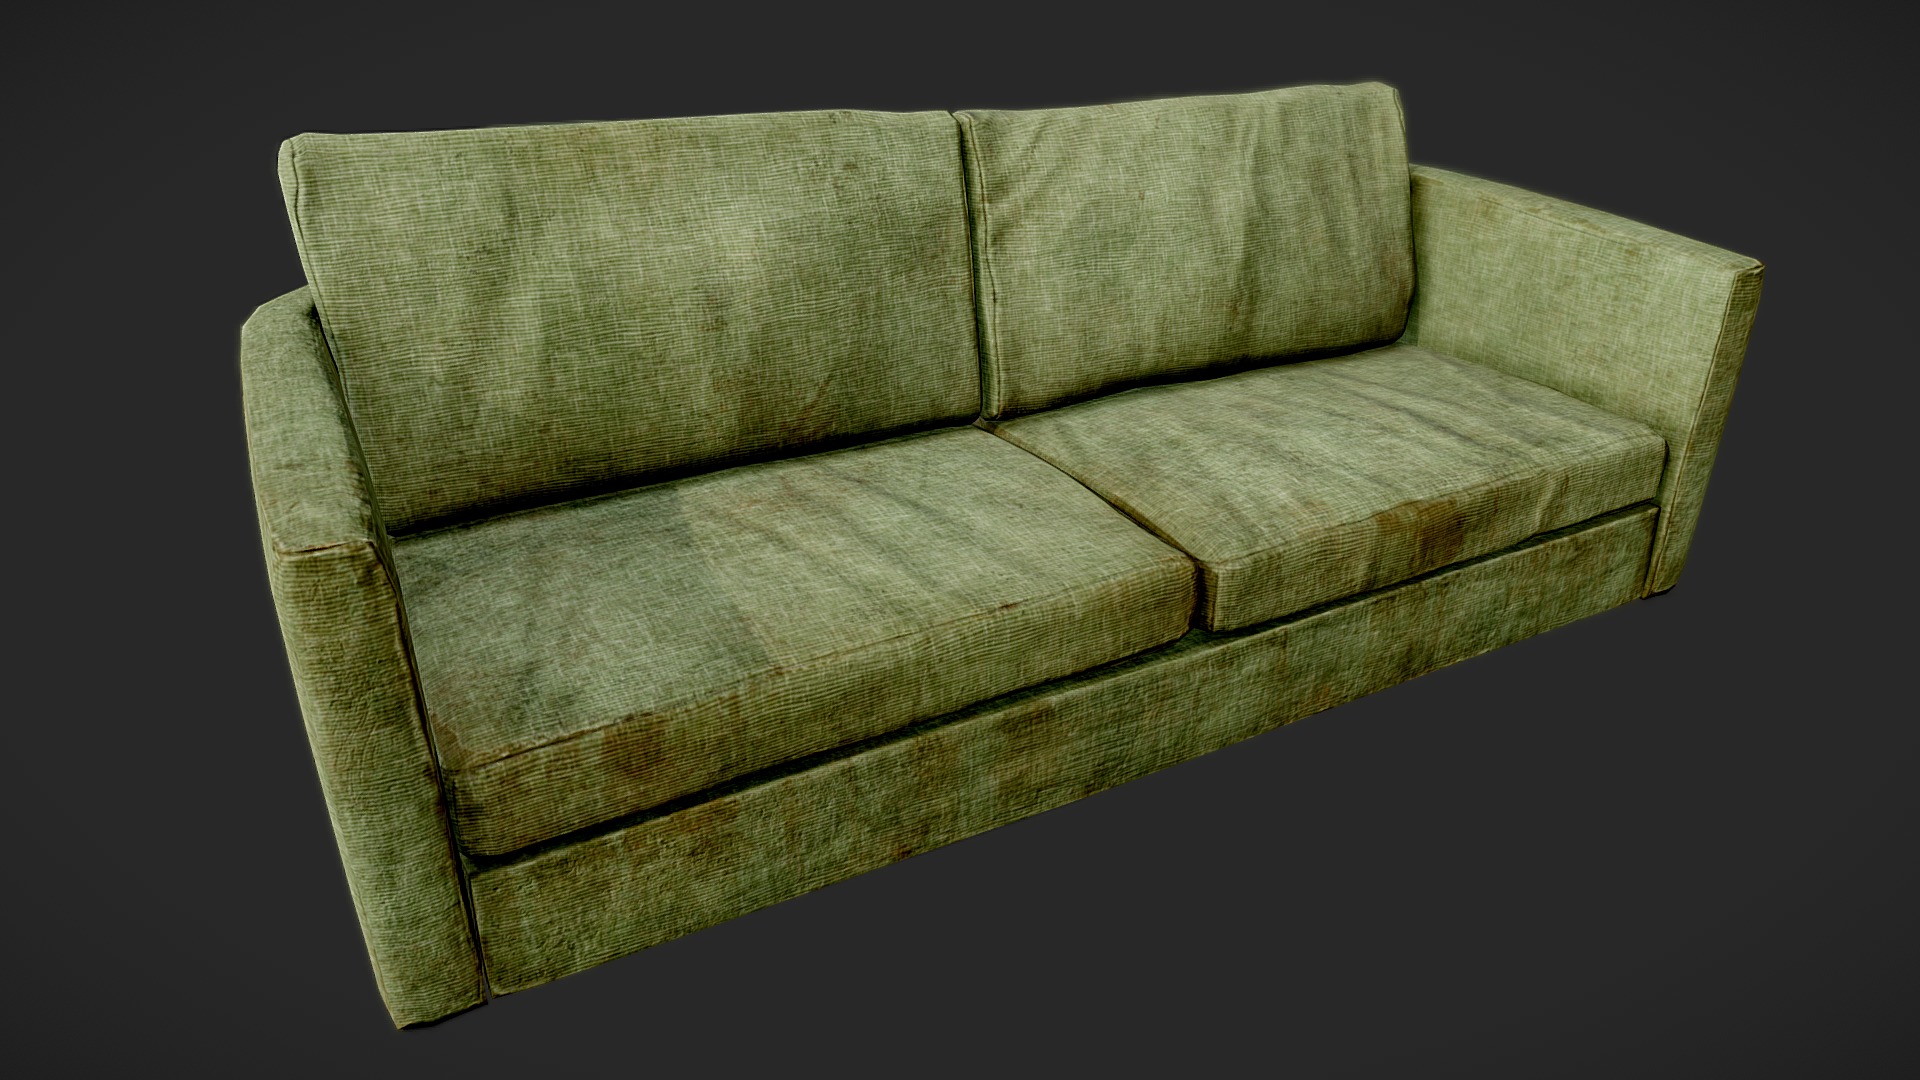 3D model Old Dirty Couch 02 Green – PBR - This is a 3D model of the Old Dirty Couch 02 Green - PBR. The 3D model is about a couch with a cushion.